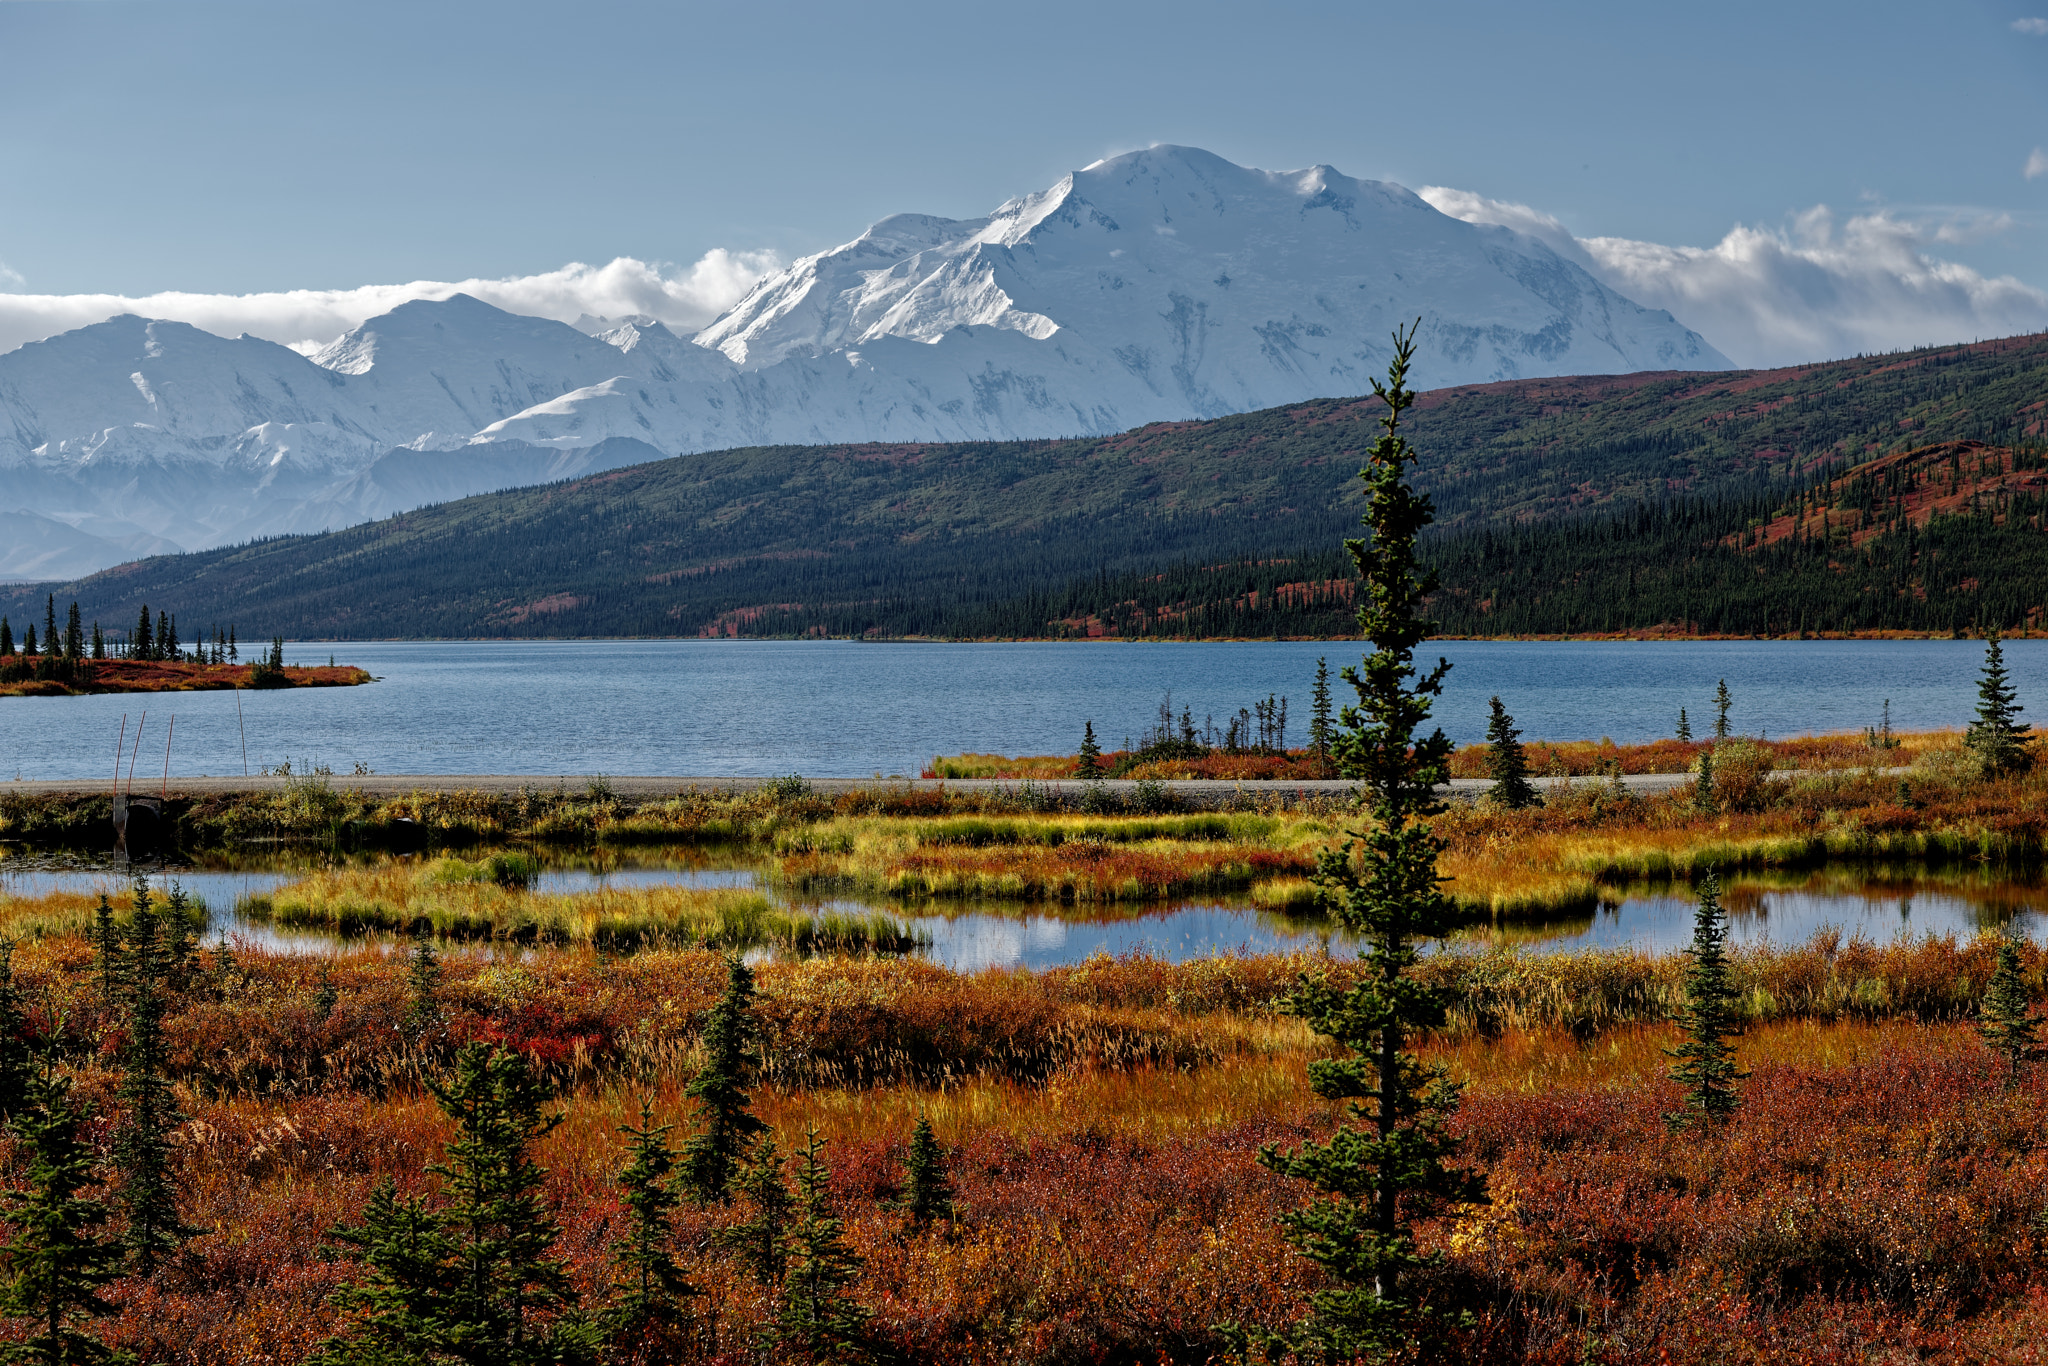 Alaska Only Requires That You Walk Outside to Experience Wonder!